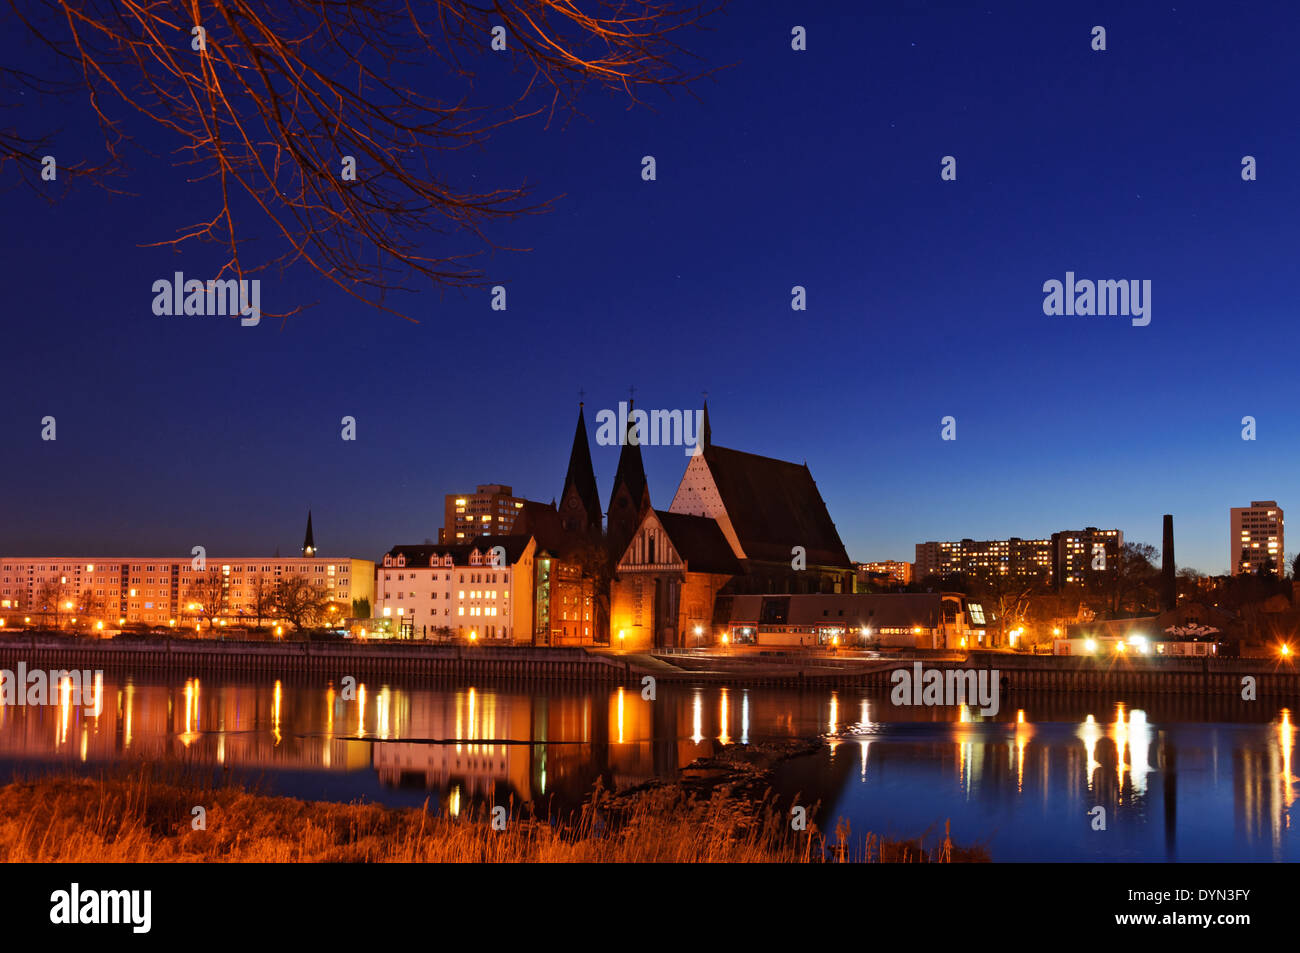 Frankfurt an der Oder, Germany at night city view Reflection Water night scene long exposure lights promenade looking over water Stock Photo